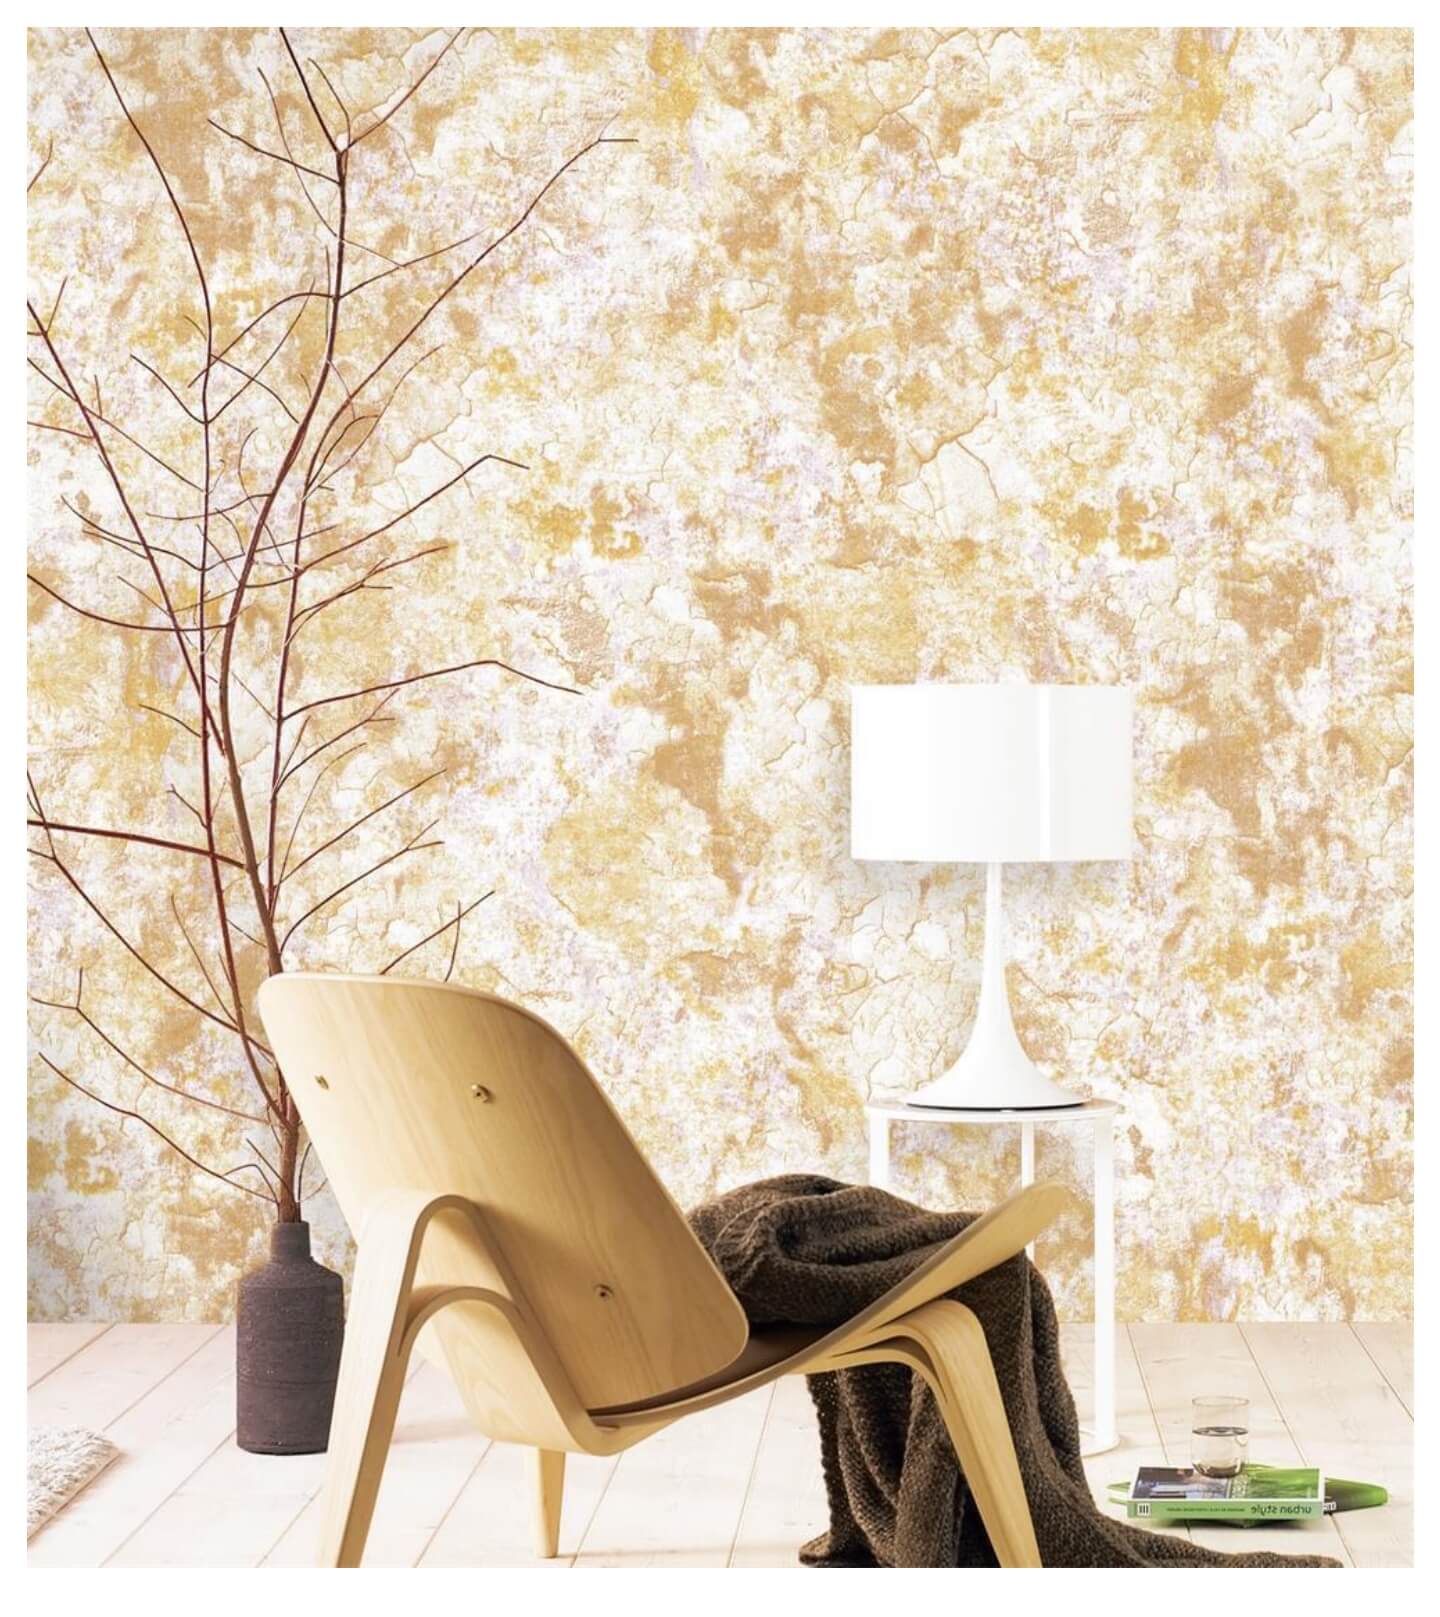 Beautiful Color 3D Design Wallpaper Better choice For Living Area, Bedroom, kids room, Office Durable PVC Wallpapers (7)